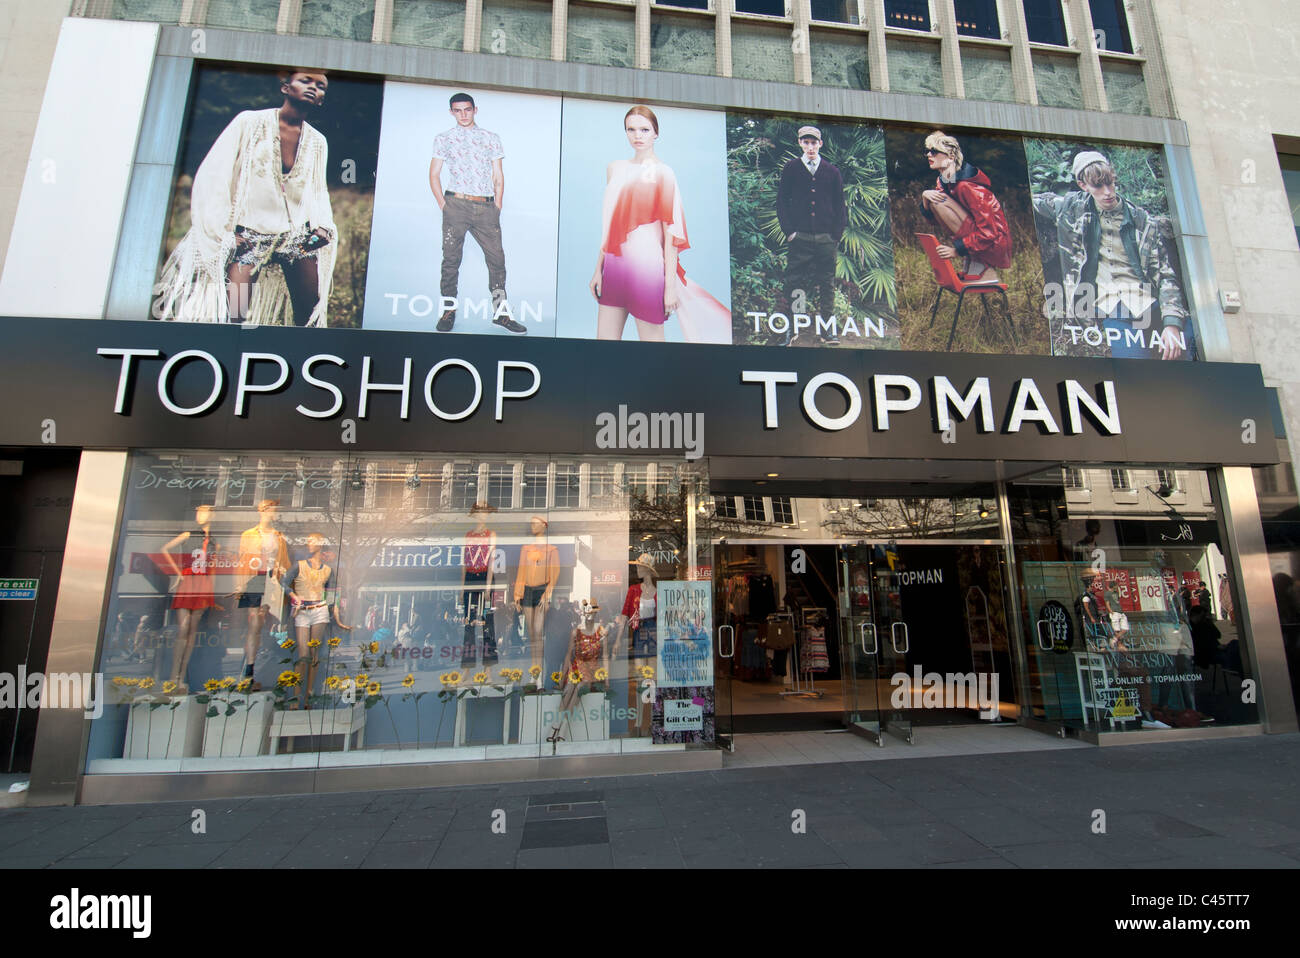 Topshop High Resolution Stock Photography and Images - Alamy